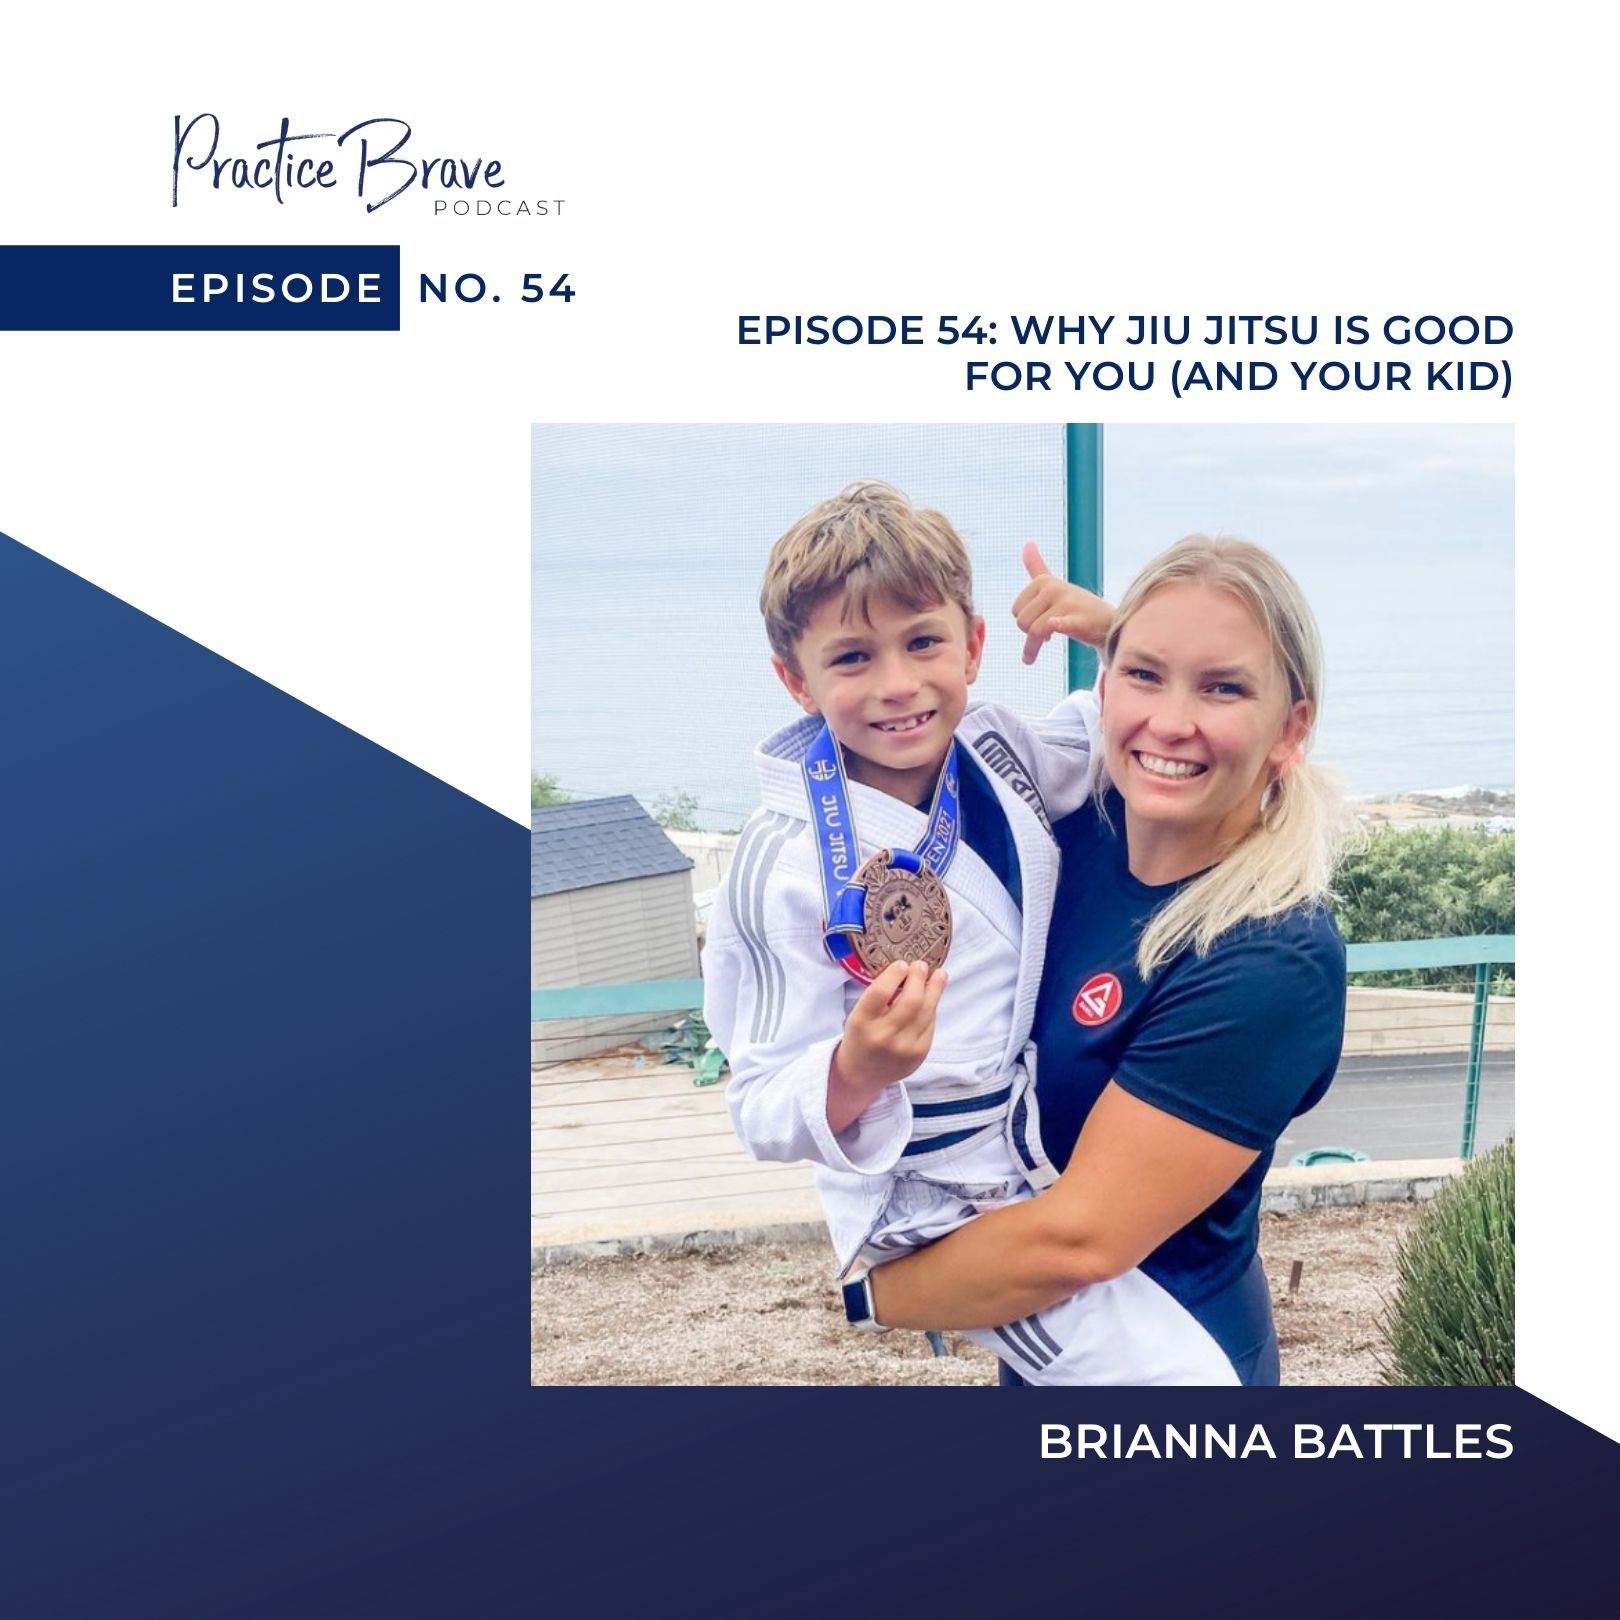 Episode 54: Why Jiu Jitsu is Good for You (and Your Kid)